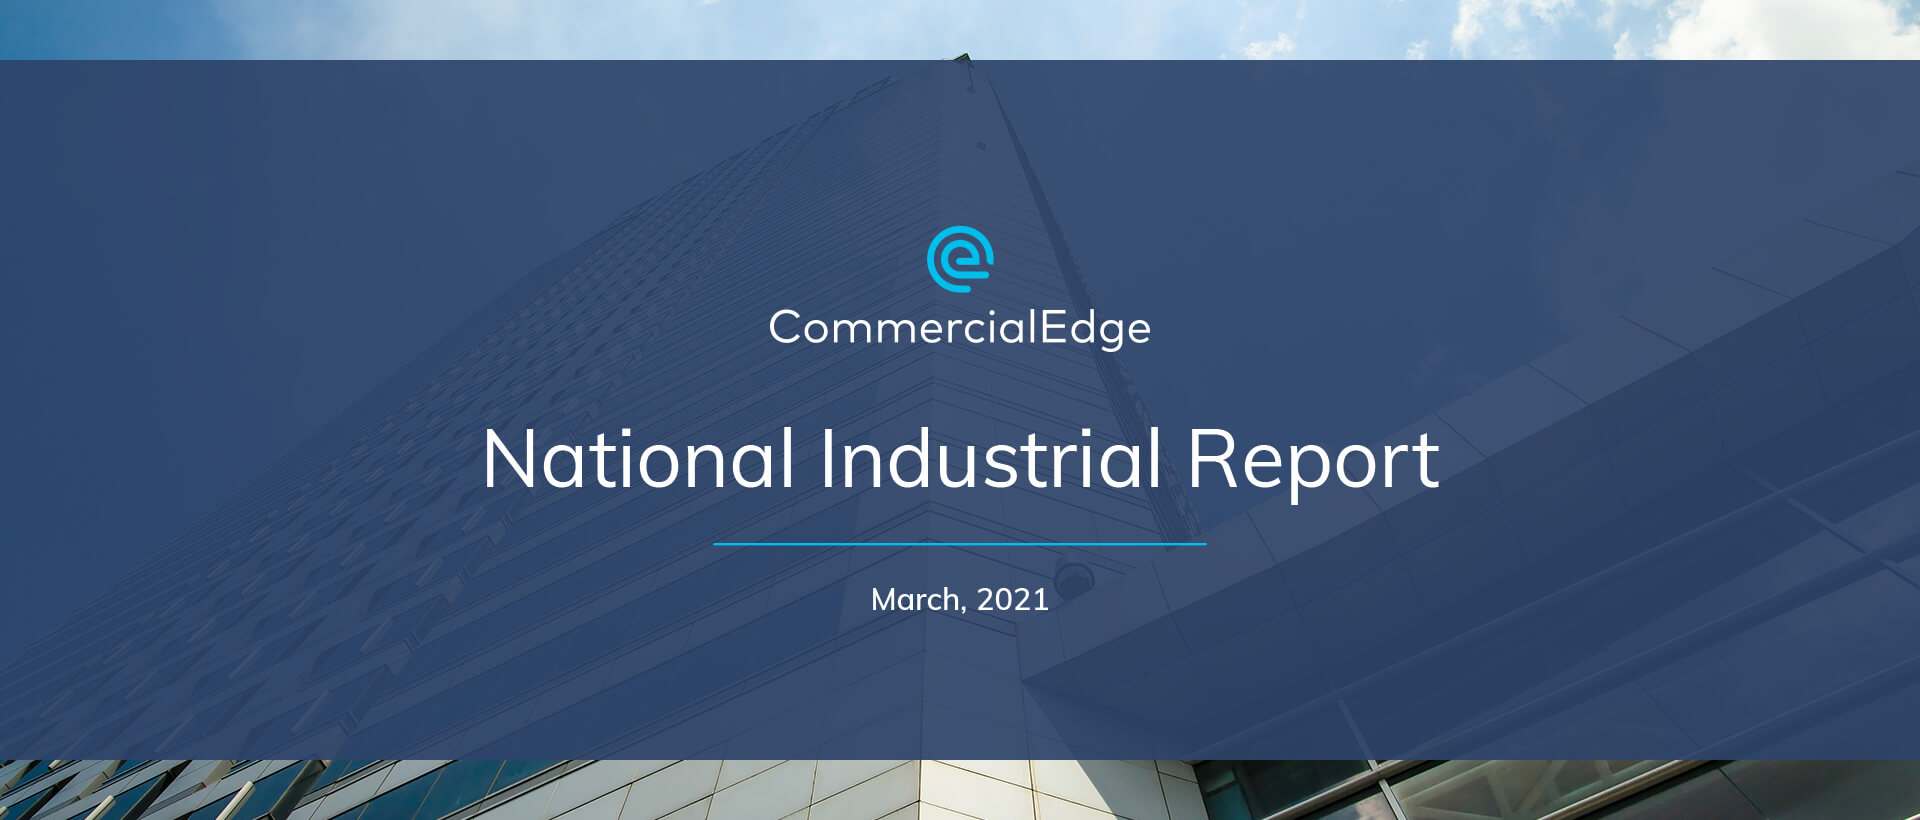 CommercialEdge National Industrial Report March 2021